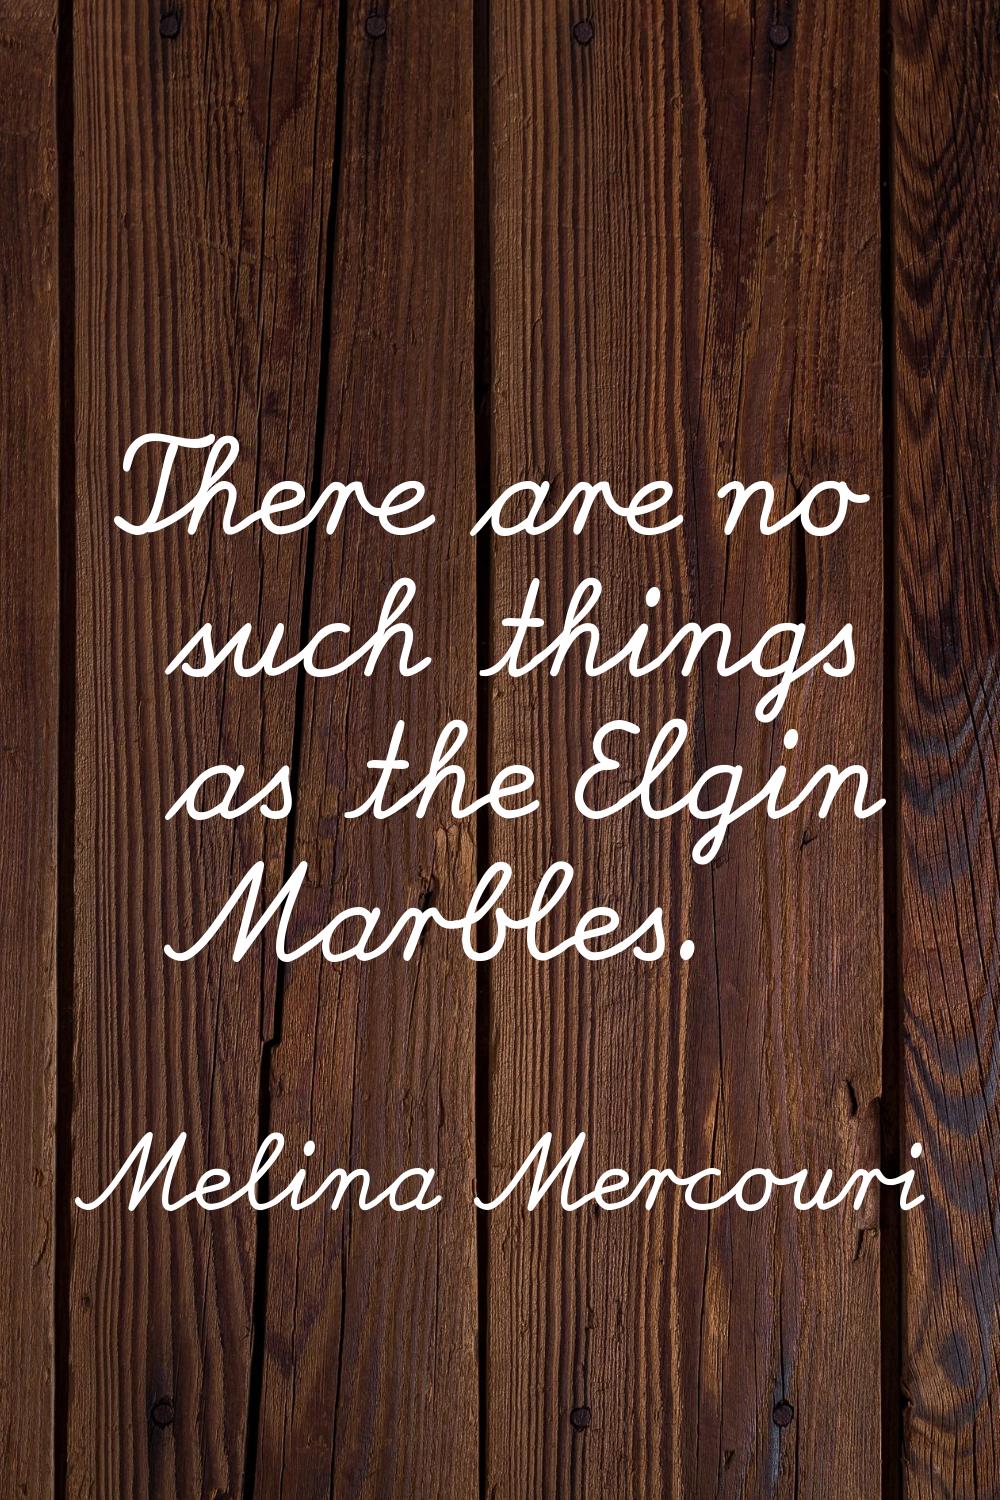 There are no such things as the Elgin Marbles.